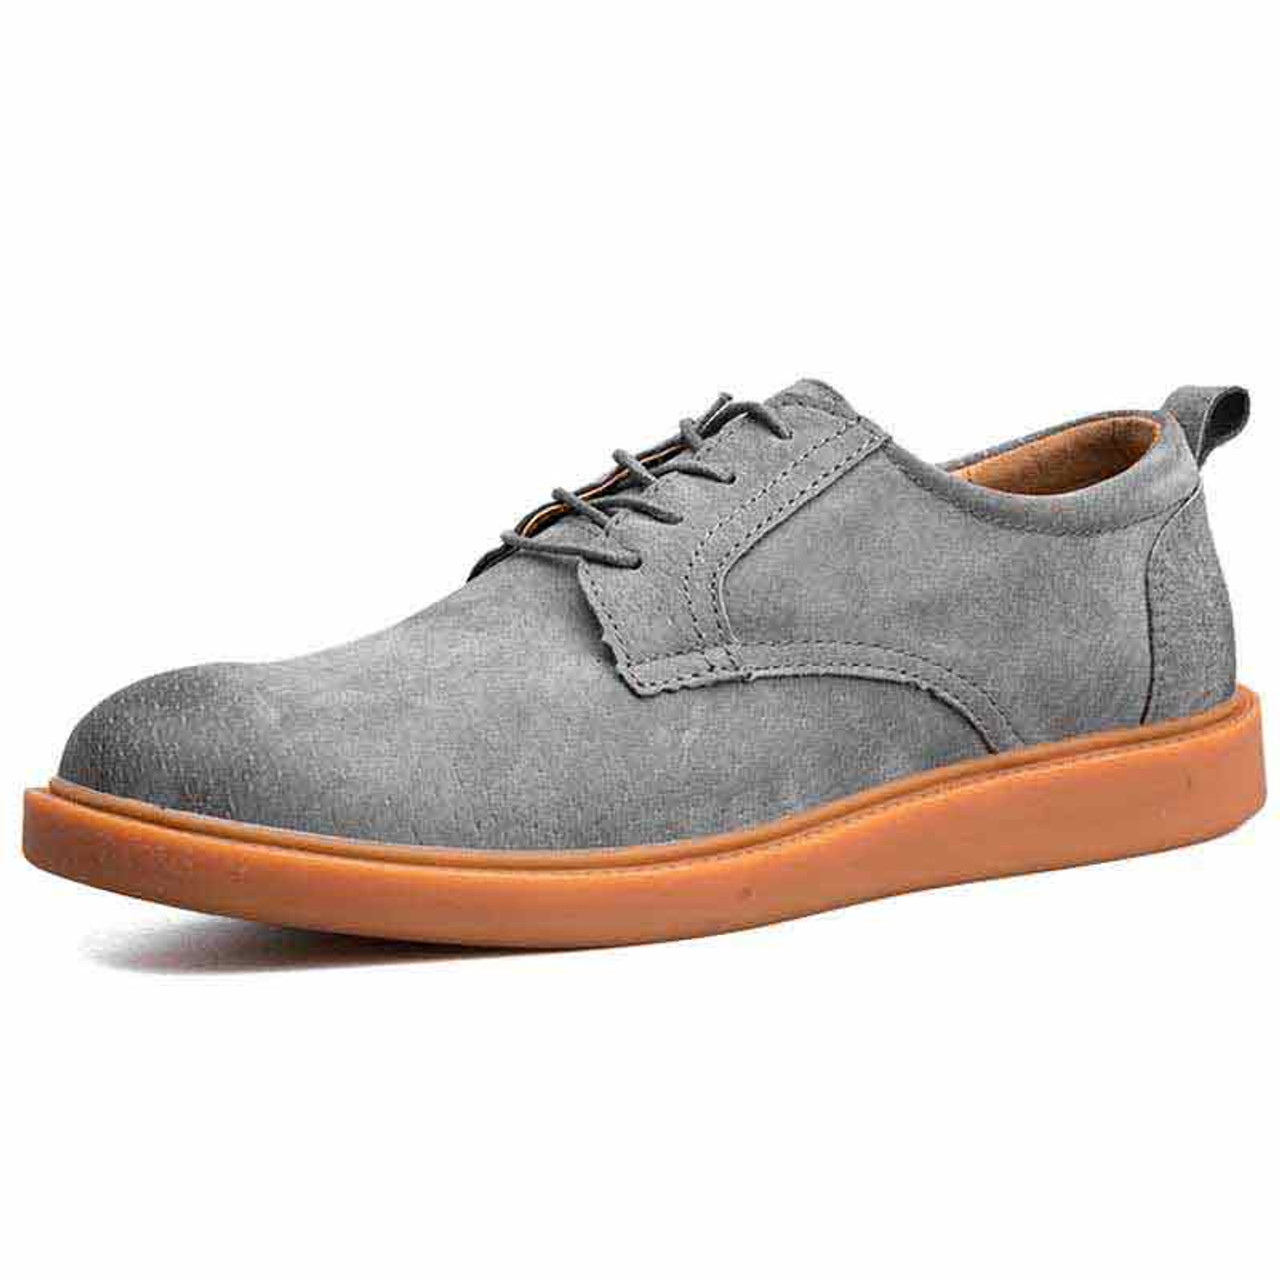 grey leather dress shoes